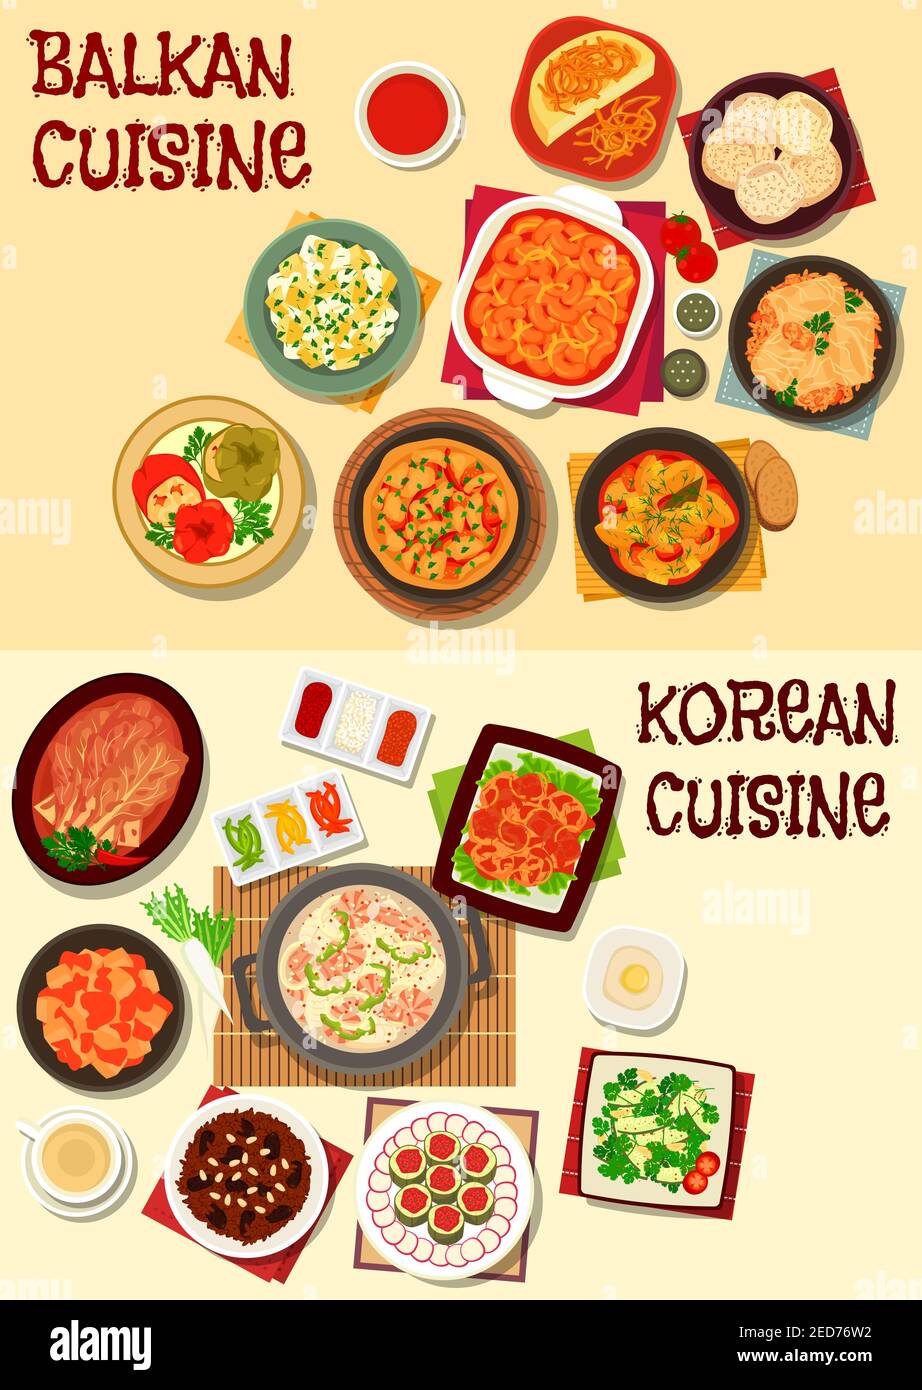 Korean and balkan cuisine icon set with kimchi vegetables, seafood soup, vegetable and bean stew, marinated fish, stuffed cabbage and pepper, polenta, Stock Vector